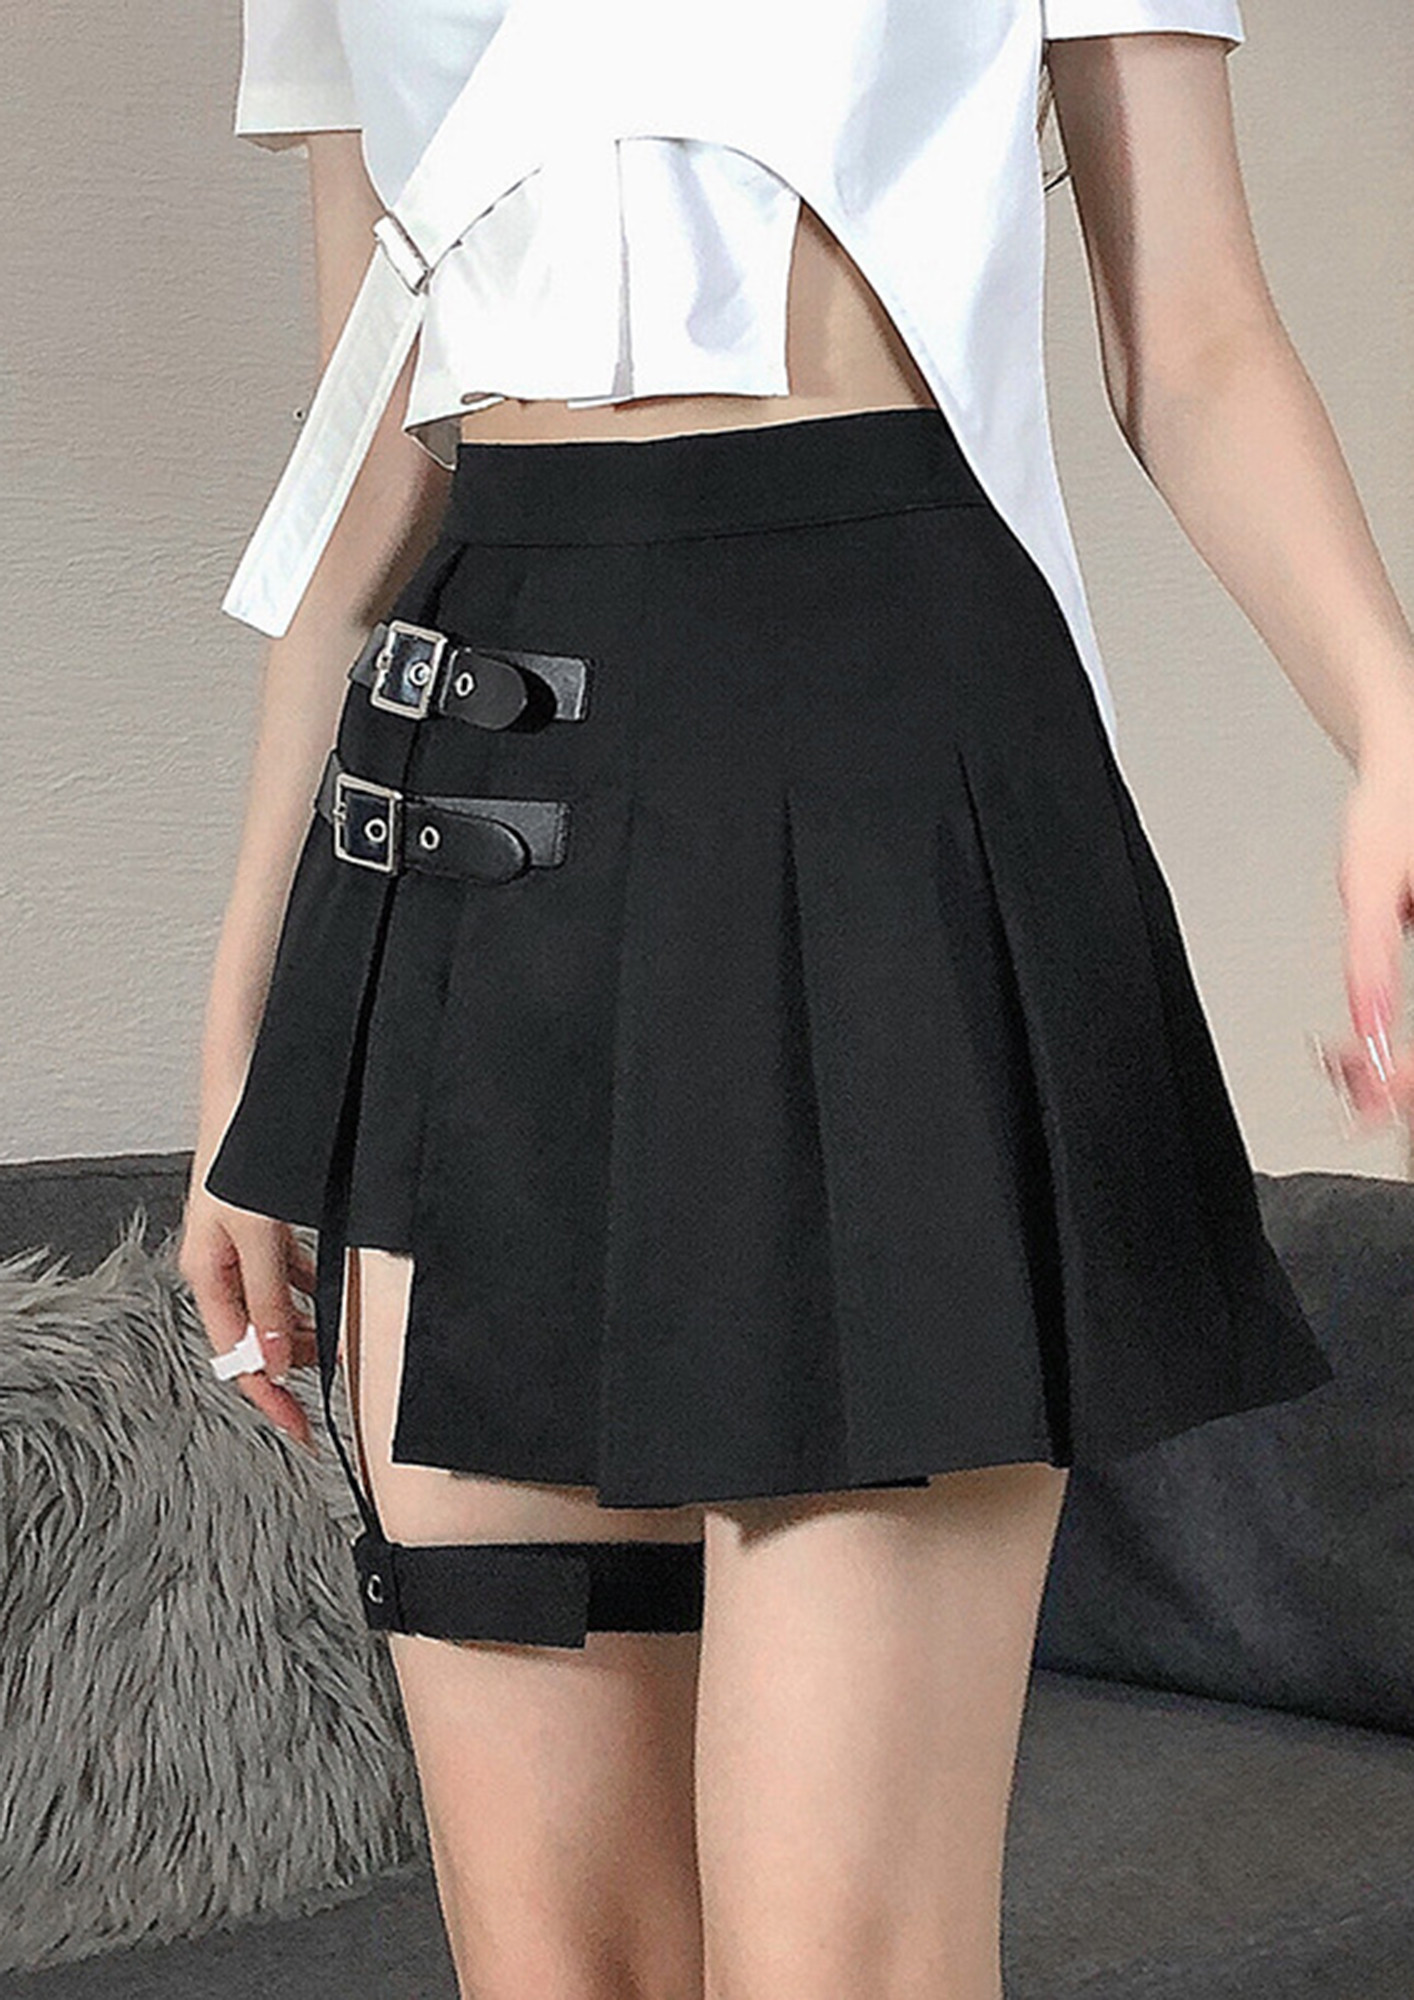 WITH A LEG RING BLACK SKIRT